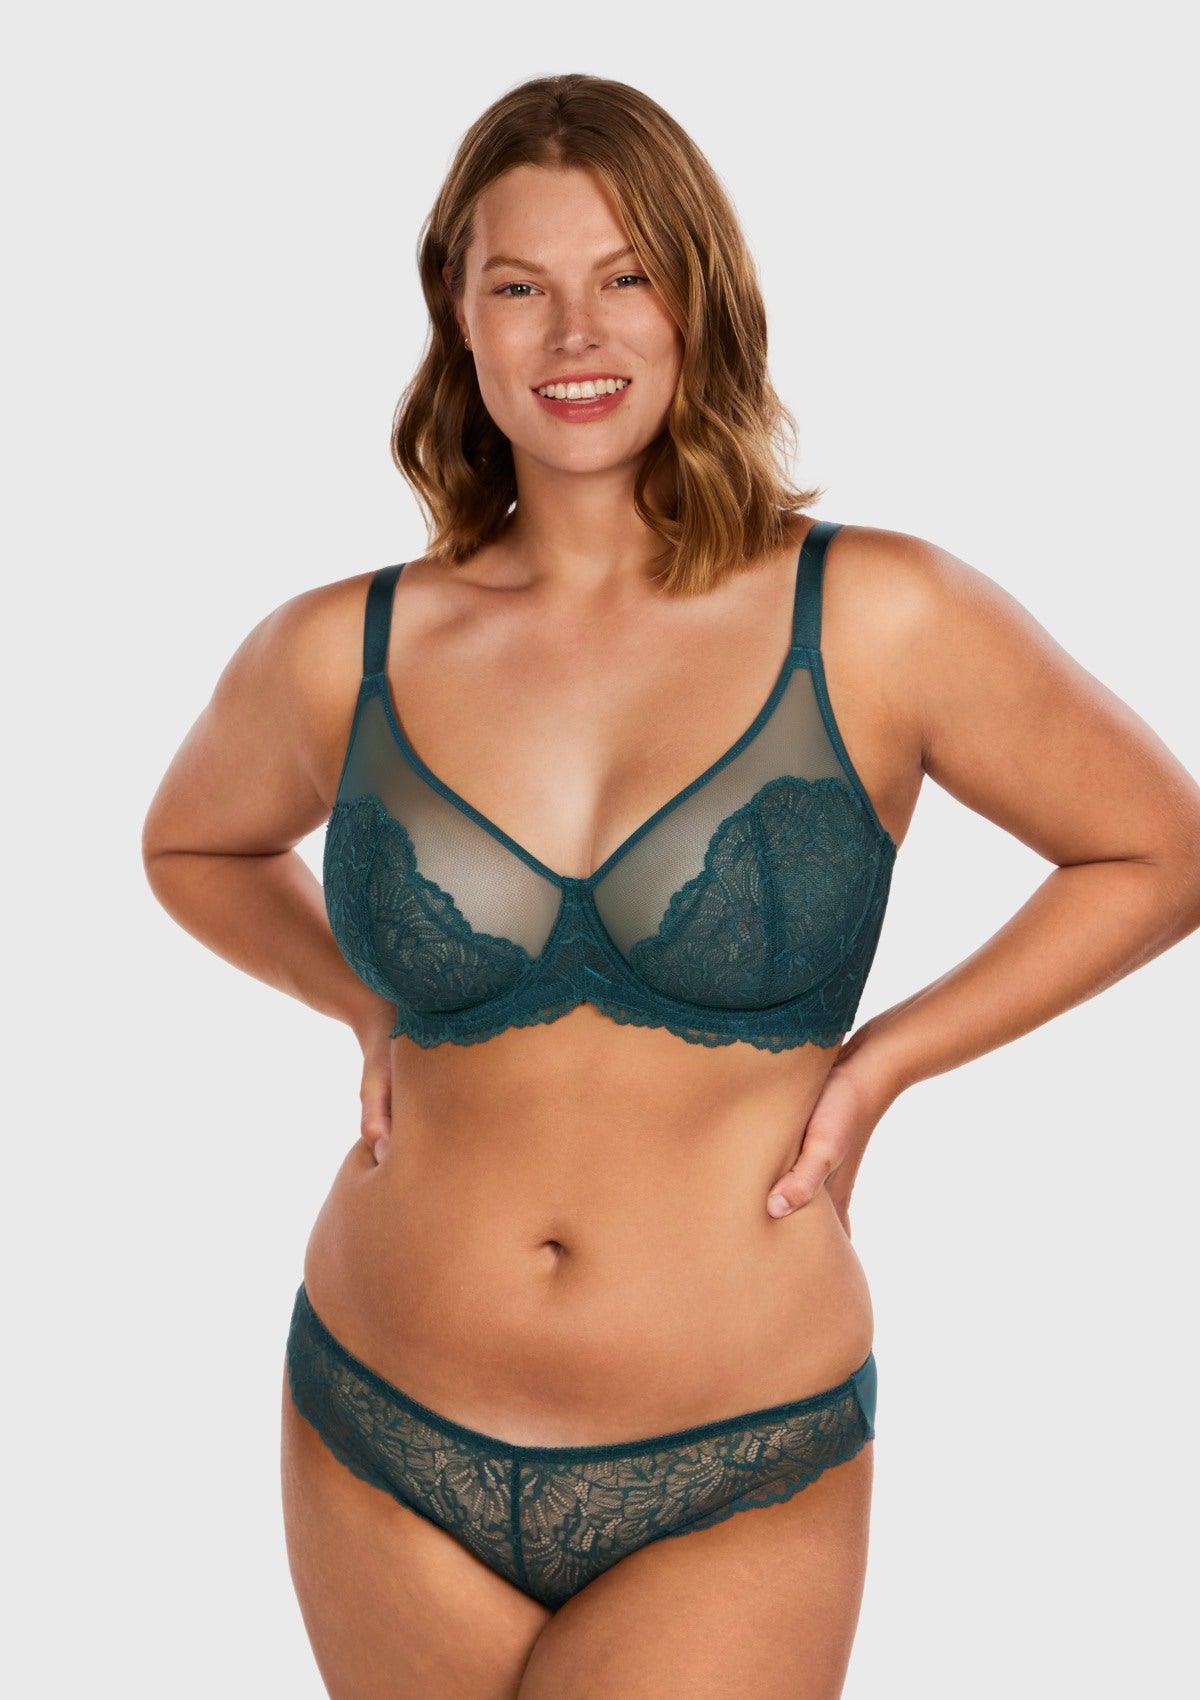 HSIA Blossom Full Figure See-Through Lace Bra For Side And Back Fat - Balsam Blue / 46 / C